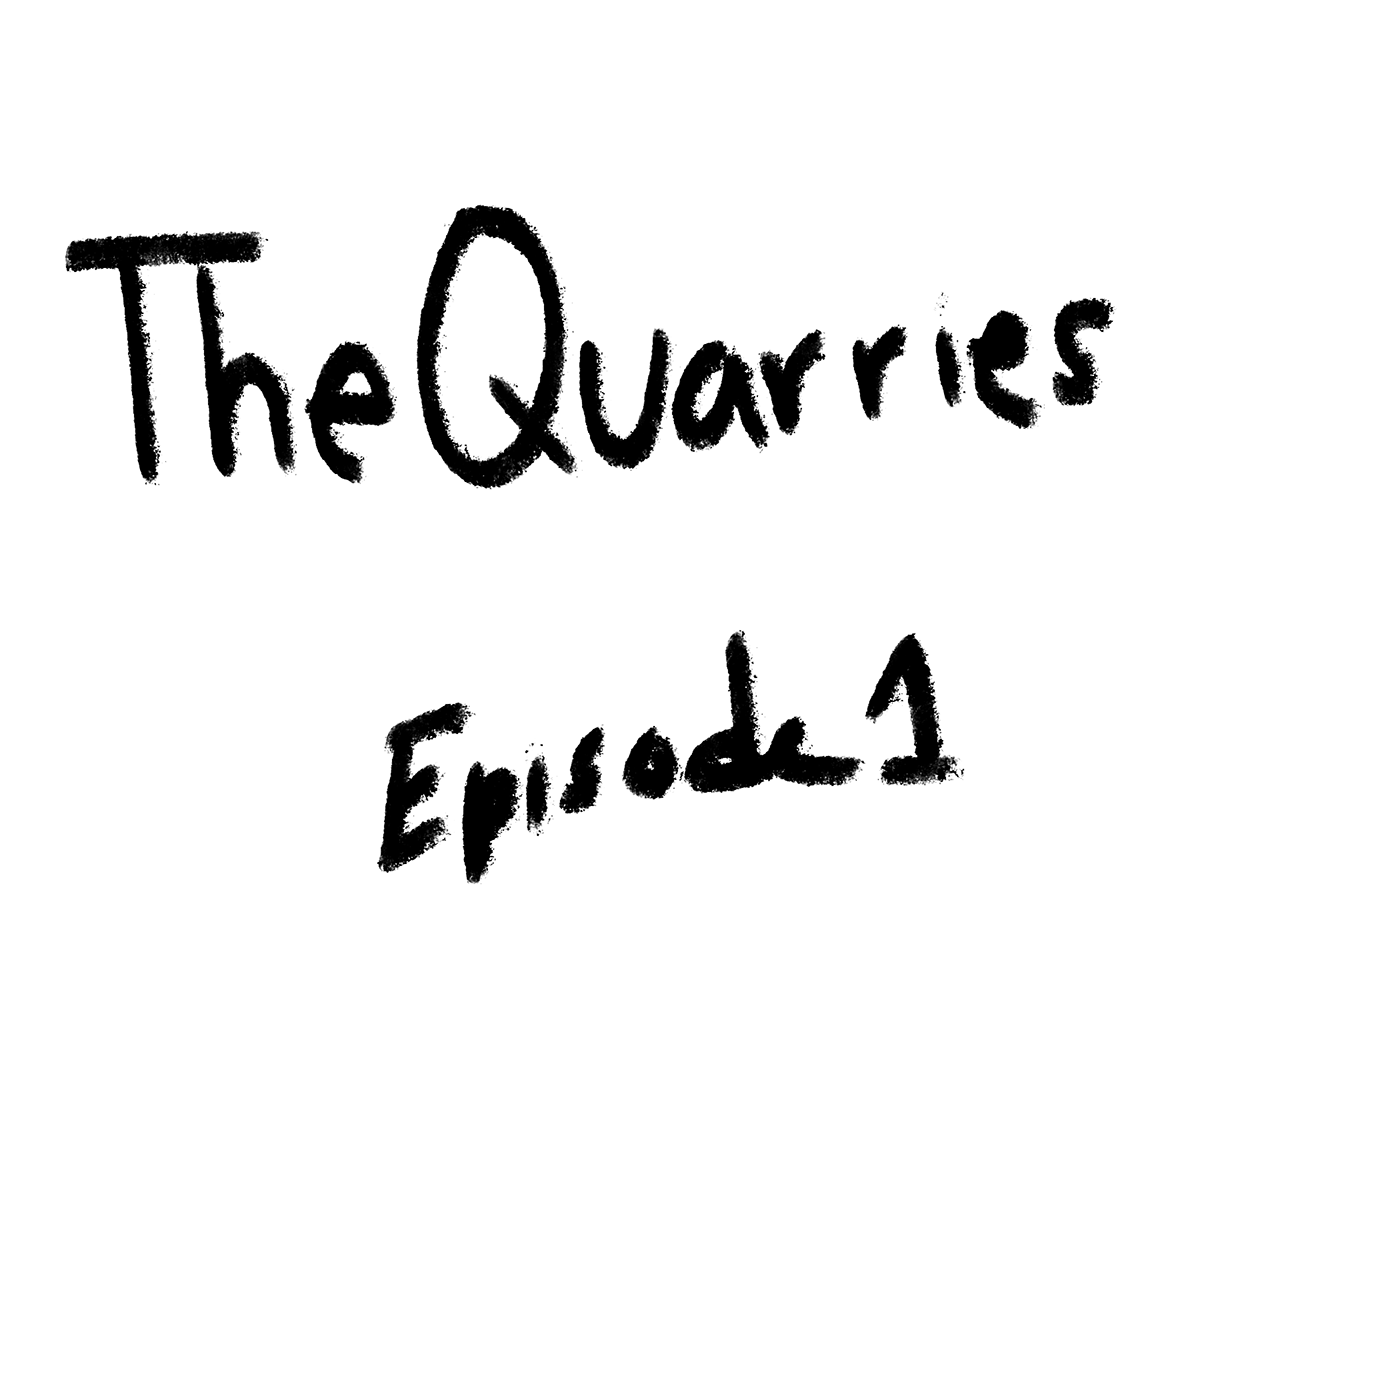 adobefresco Drawing  thequarries